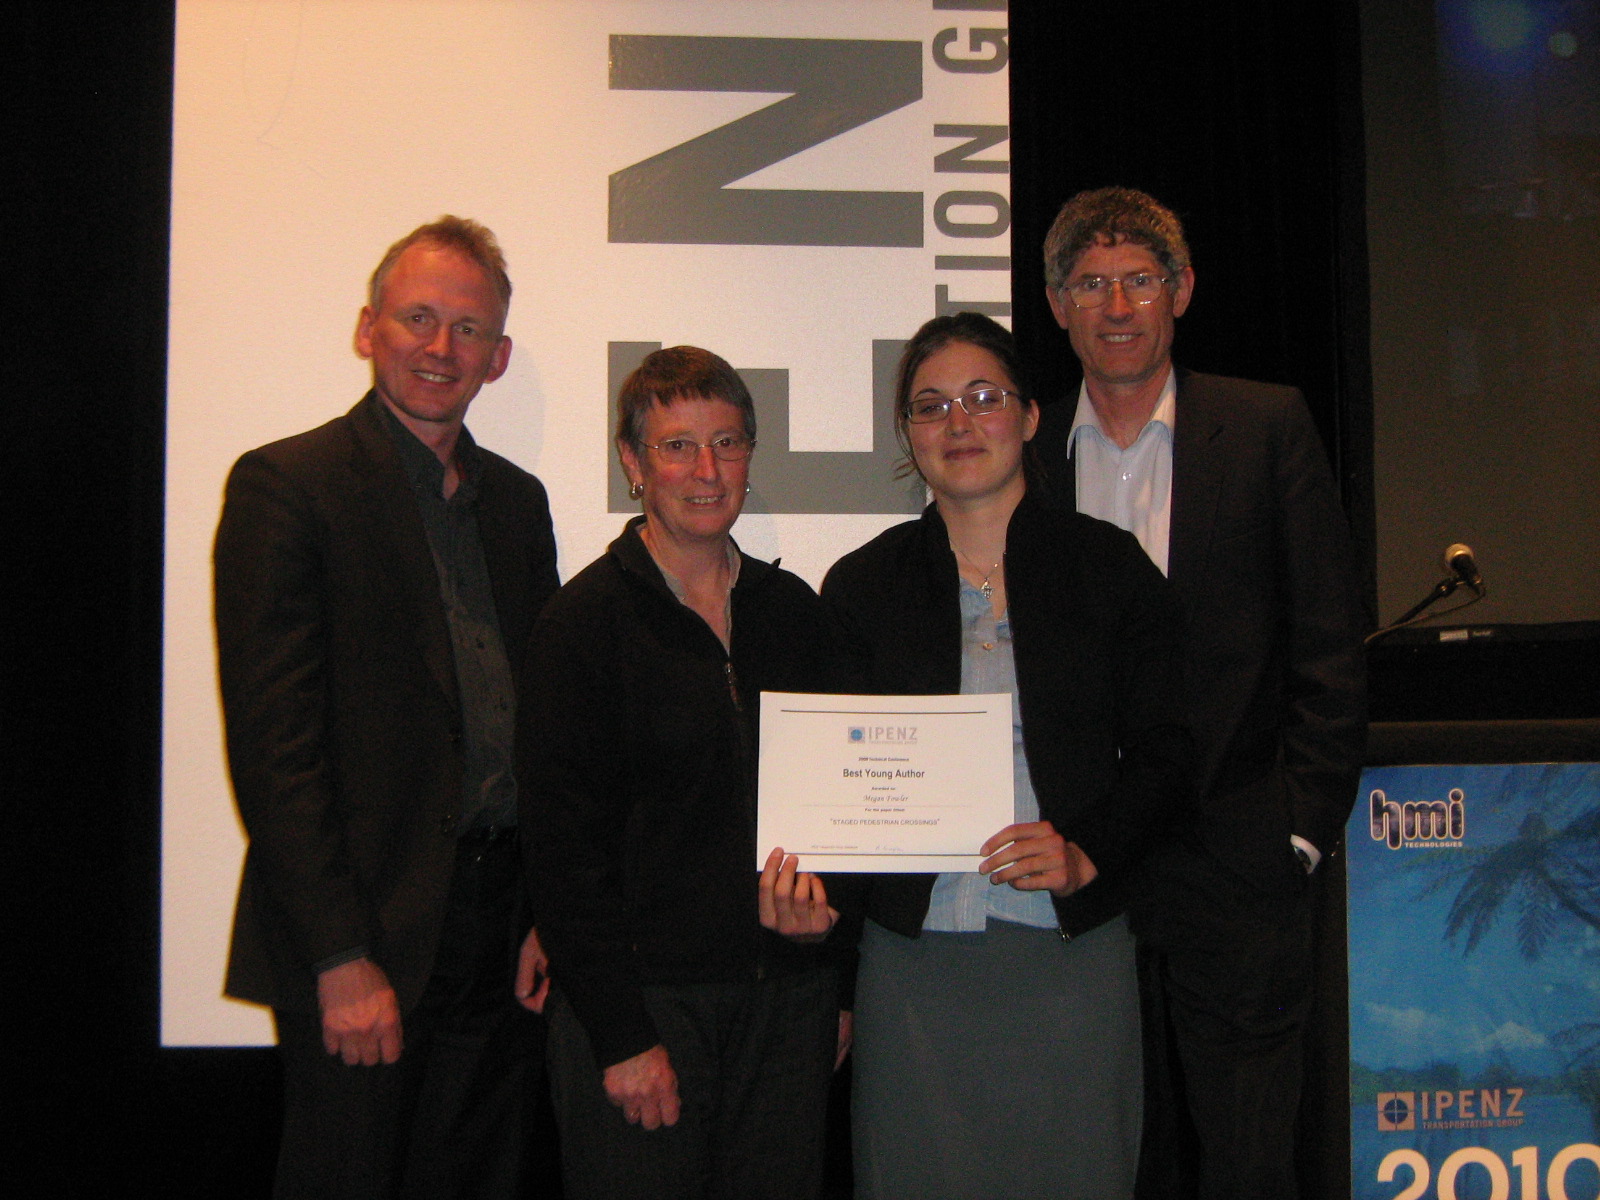 (from left) Axel, Lorraine, Megan (with her 'Best Young Author' award certificate), and Andrew